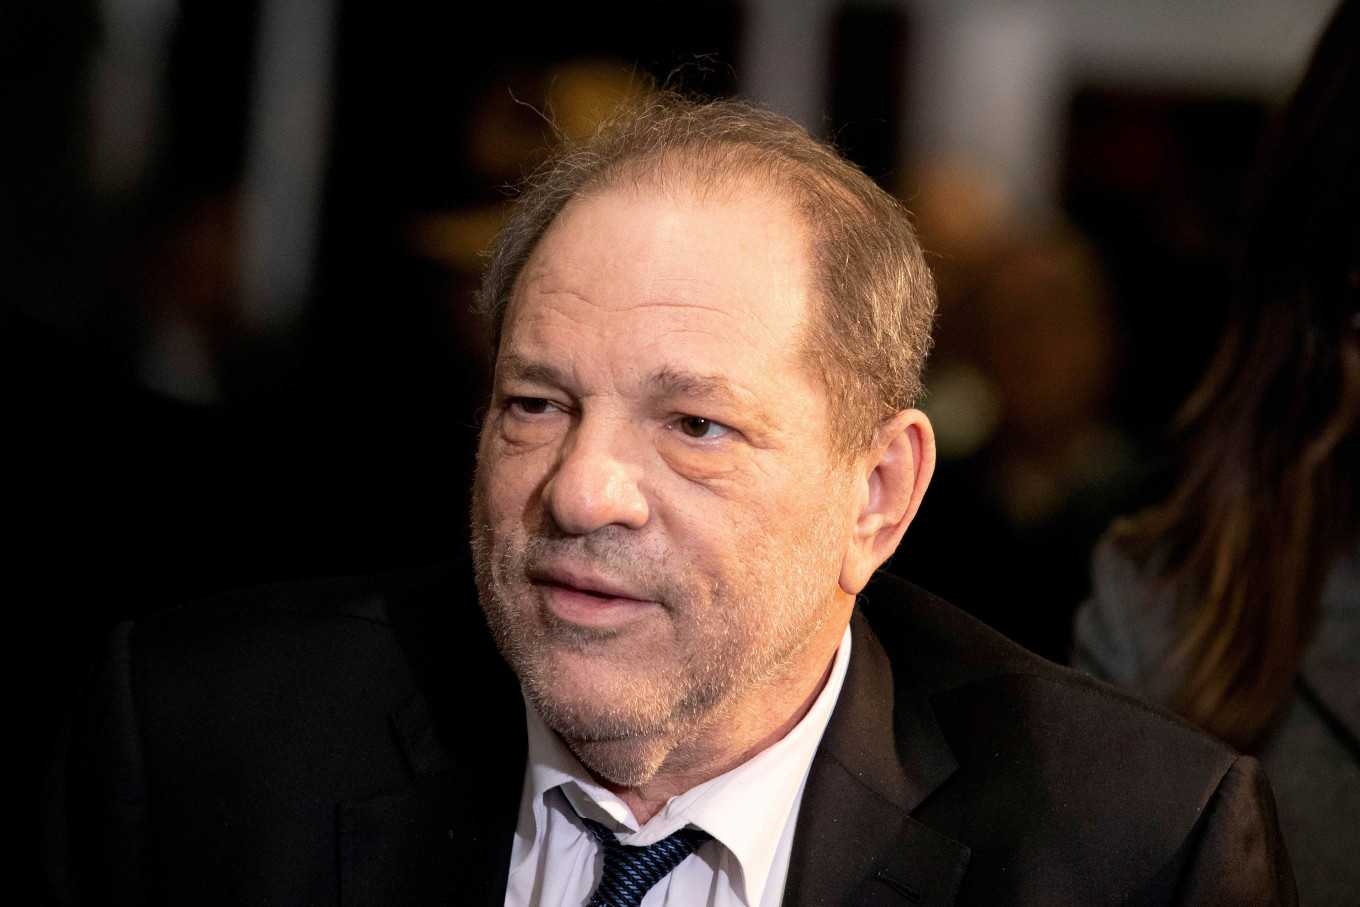 Harvey Weinstein can be extradited to California